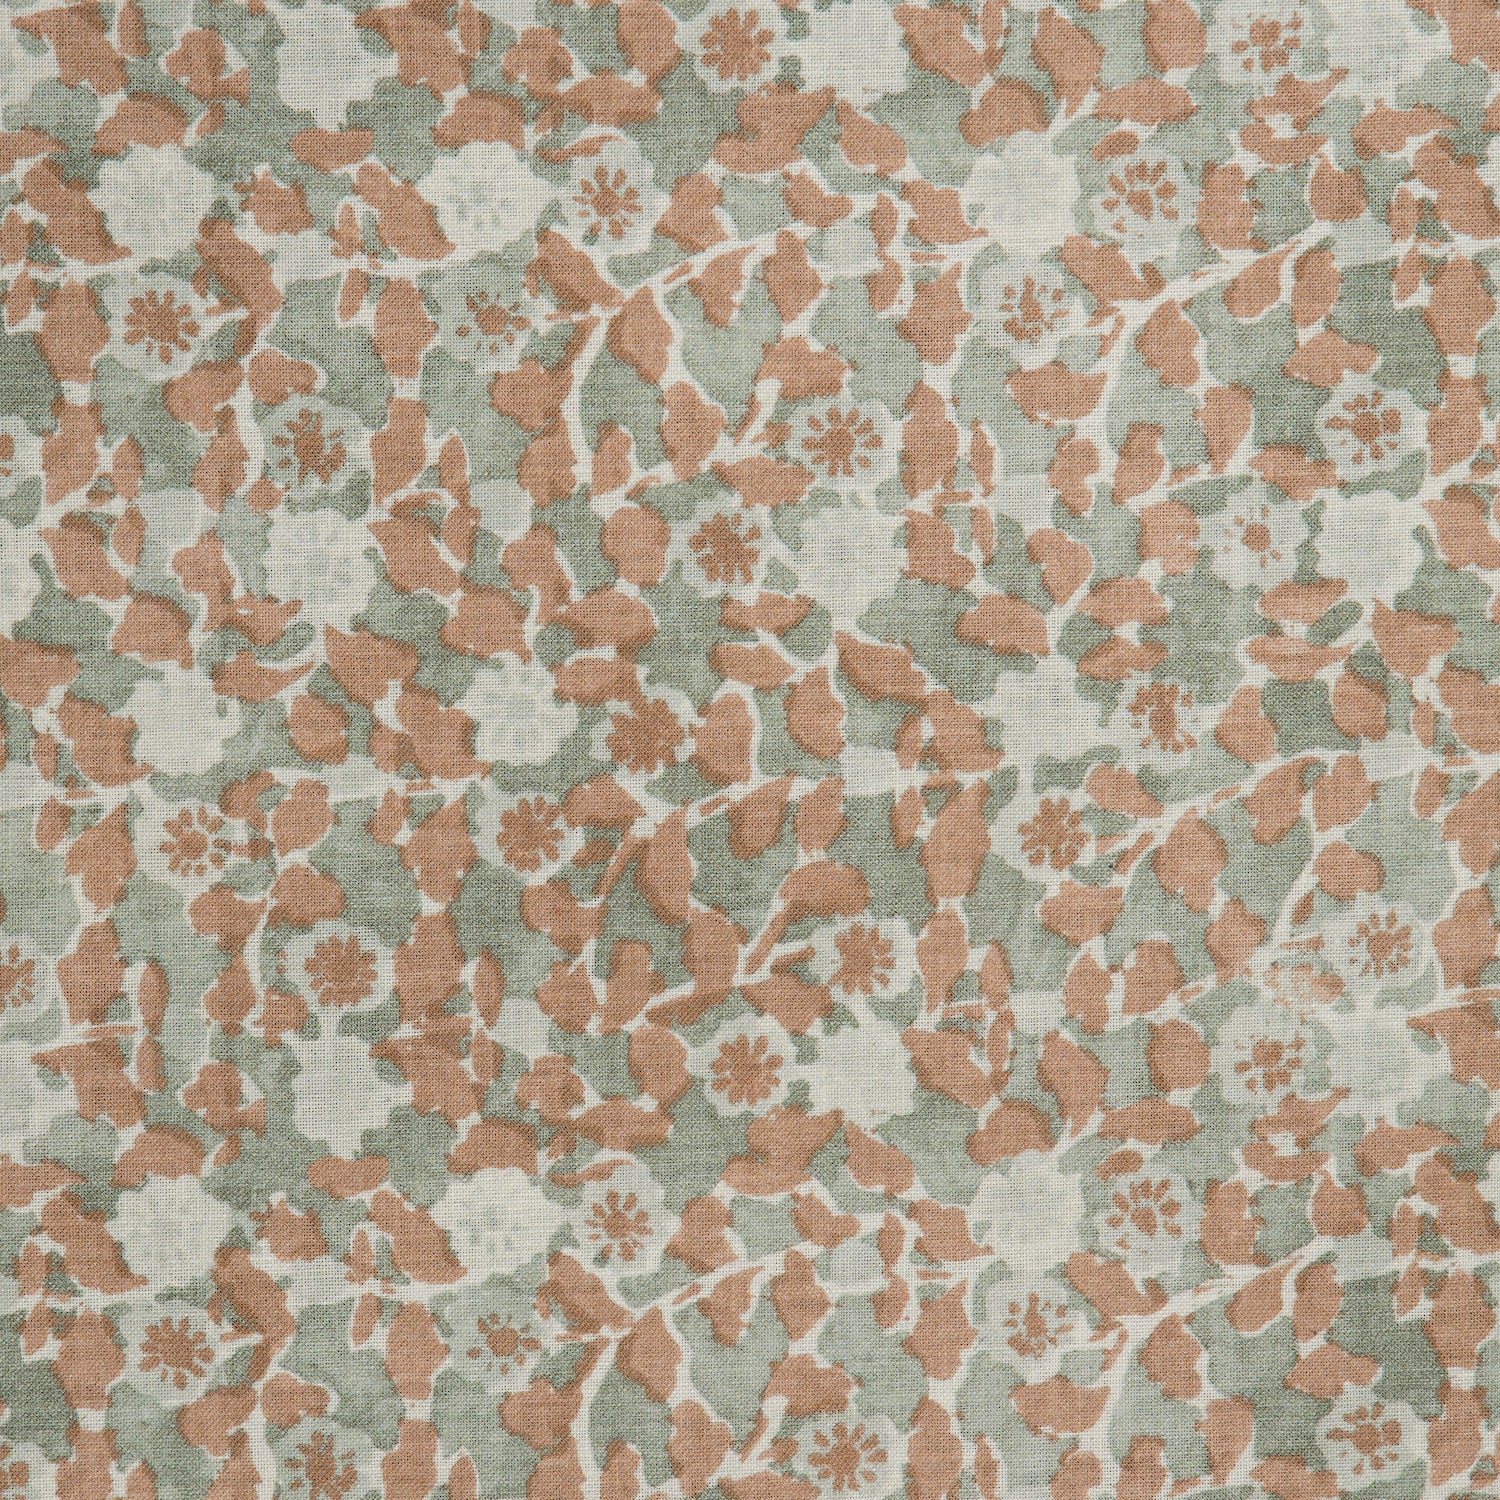 Detail of a linen fabric in a painterly floral pattern in sage and brown on a gray field.